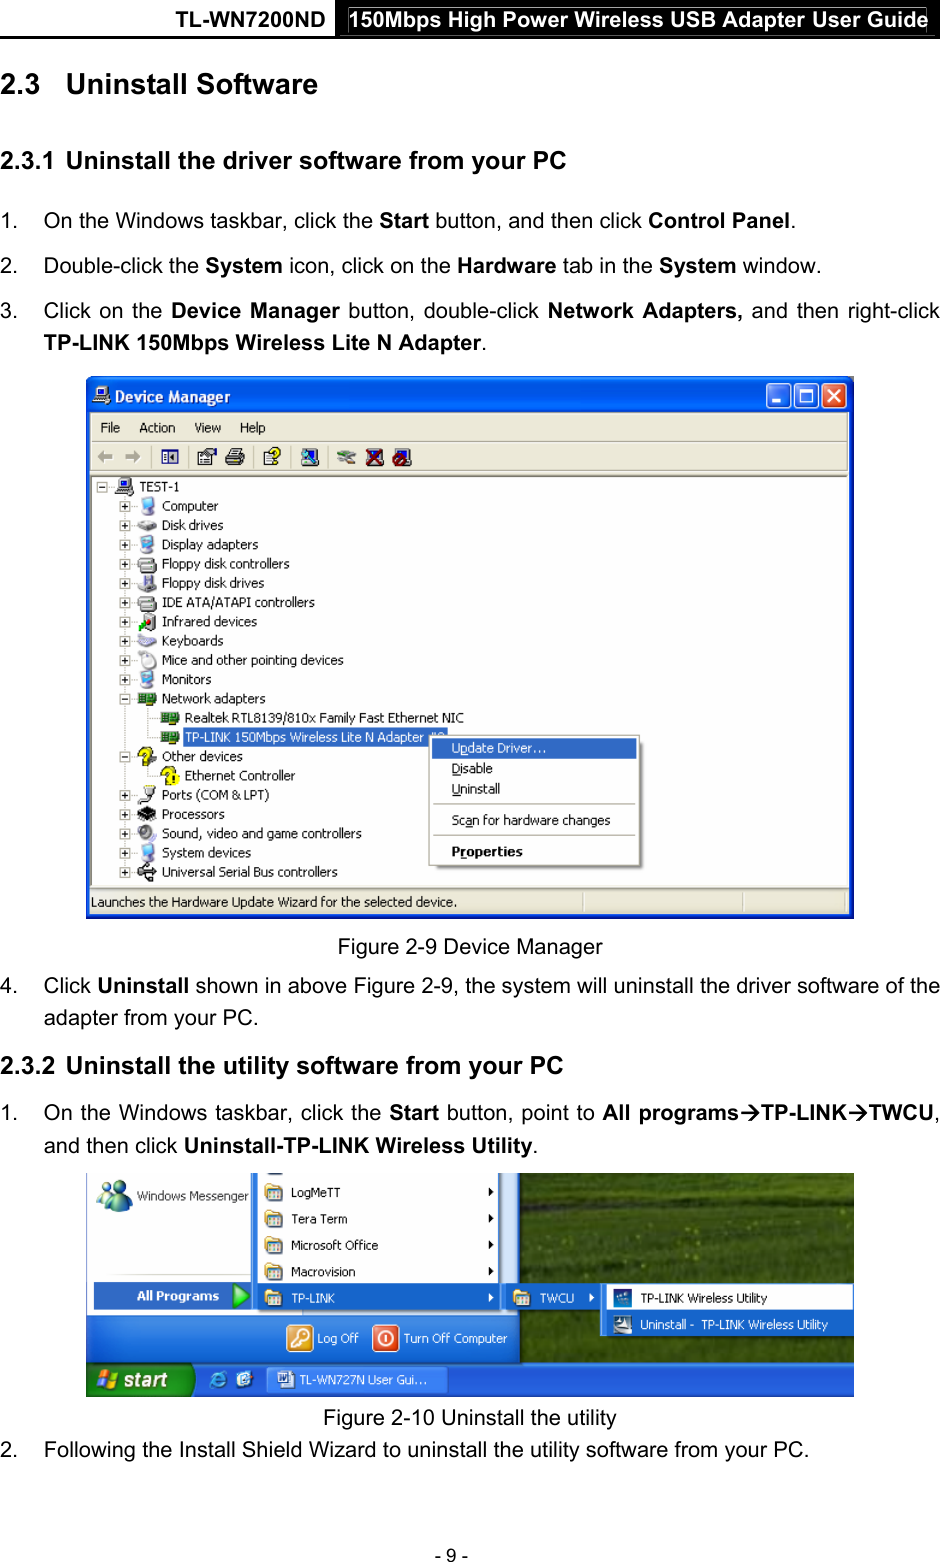 150Mbps High Power Wireless USB Adapter User GuideTL-WN7200ND  - 9 - 2.3  Uninstall Software 2.3.1  Uninstall the driver software from your PC 1.  On the Windows taskbar, click the Start button, and then click Control Panel. 2. Double-click the System icon, click on the Hardware tab in the System window. 3.  Click on the Device Manager button, double-click Network Adapters, and then right-click TP-LINK 150Mbps Wireless Lite N Adapter.  Figure 2-9 Device Manager 4. Click Uninstall shown in above Figure 2-9, the system will uninstall the driver software of the adapter from your PC. 2.3.2  Uninstall the utility software from your PC   1.  On the Windows taskbar, click the Start button, point to All programsÆTP-LINKÆTWCU, and then click Uninstall-TP-LINK Wireless Utility.  Figure 2-10 Uninstall the utility 2.  Following the Install Shield Wizard to uninstall the utility software from your PC. 